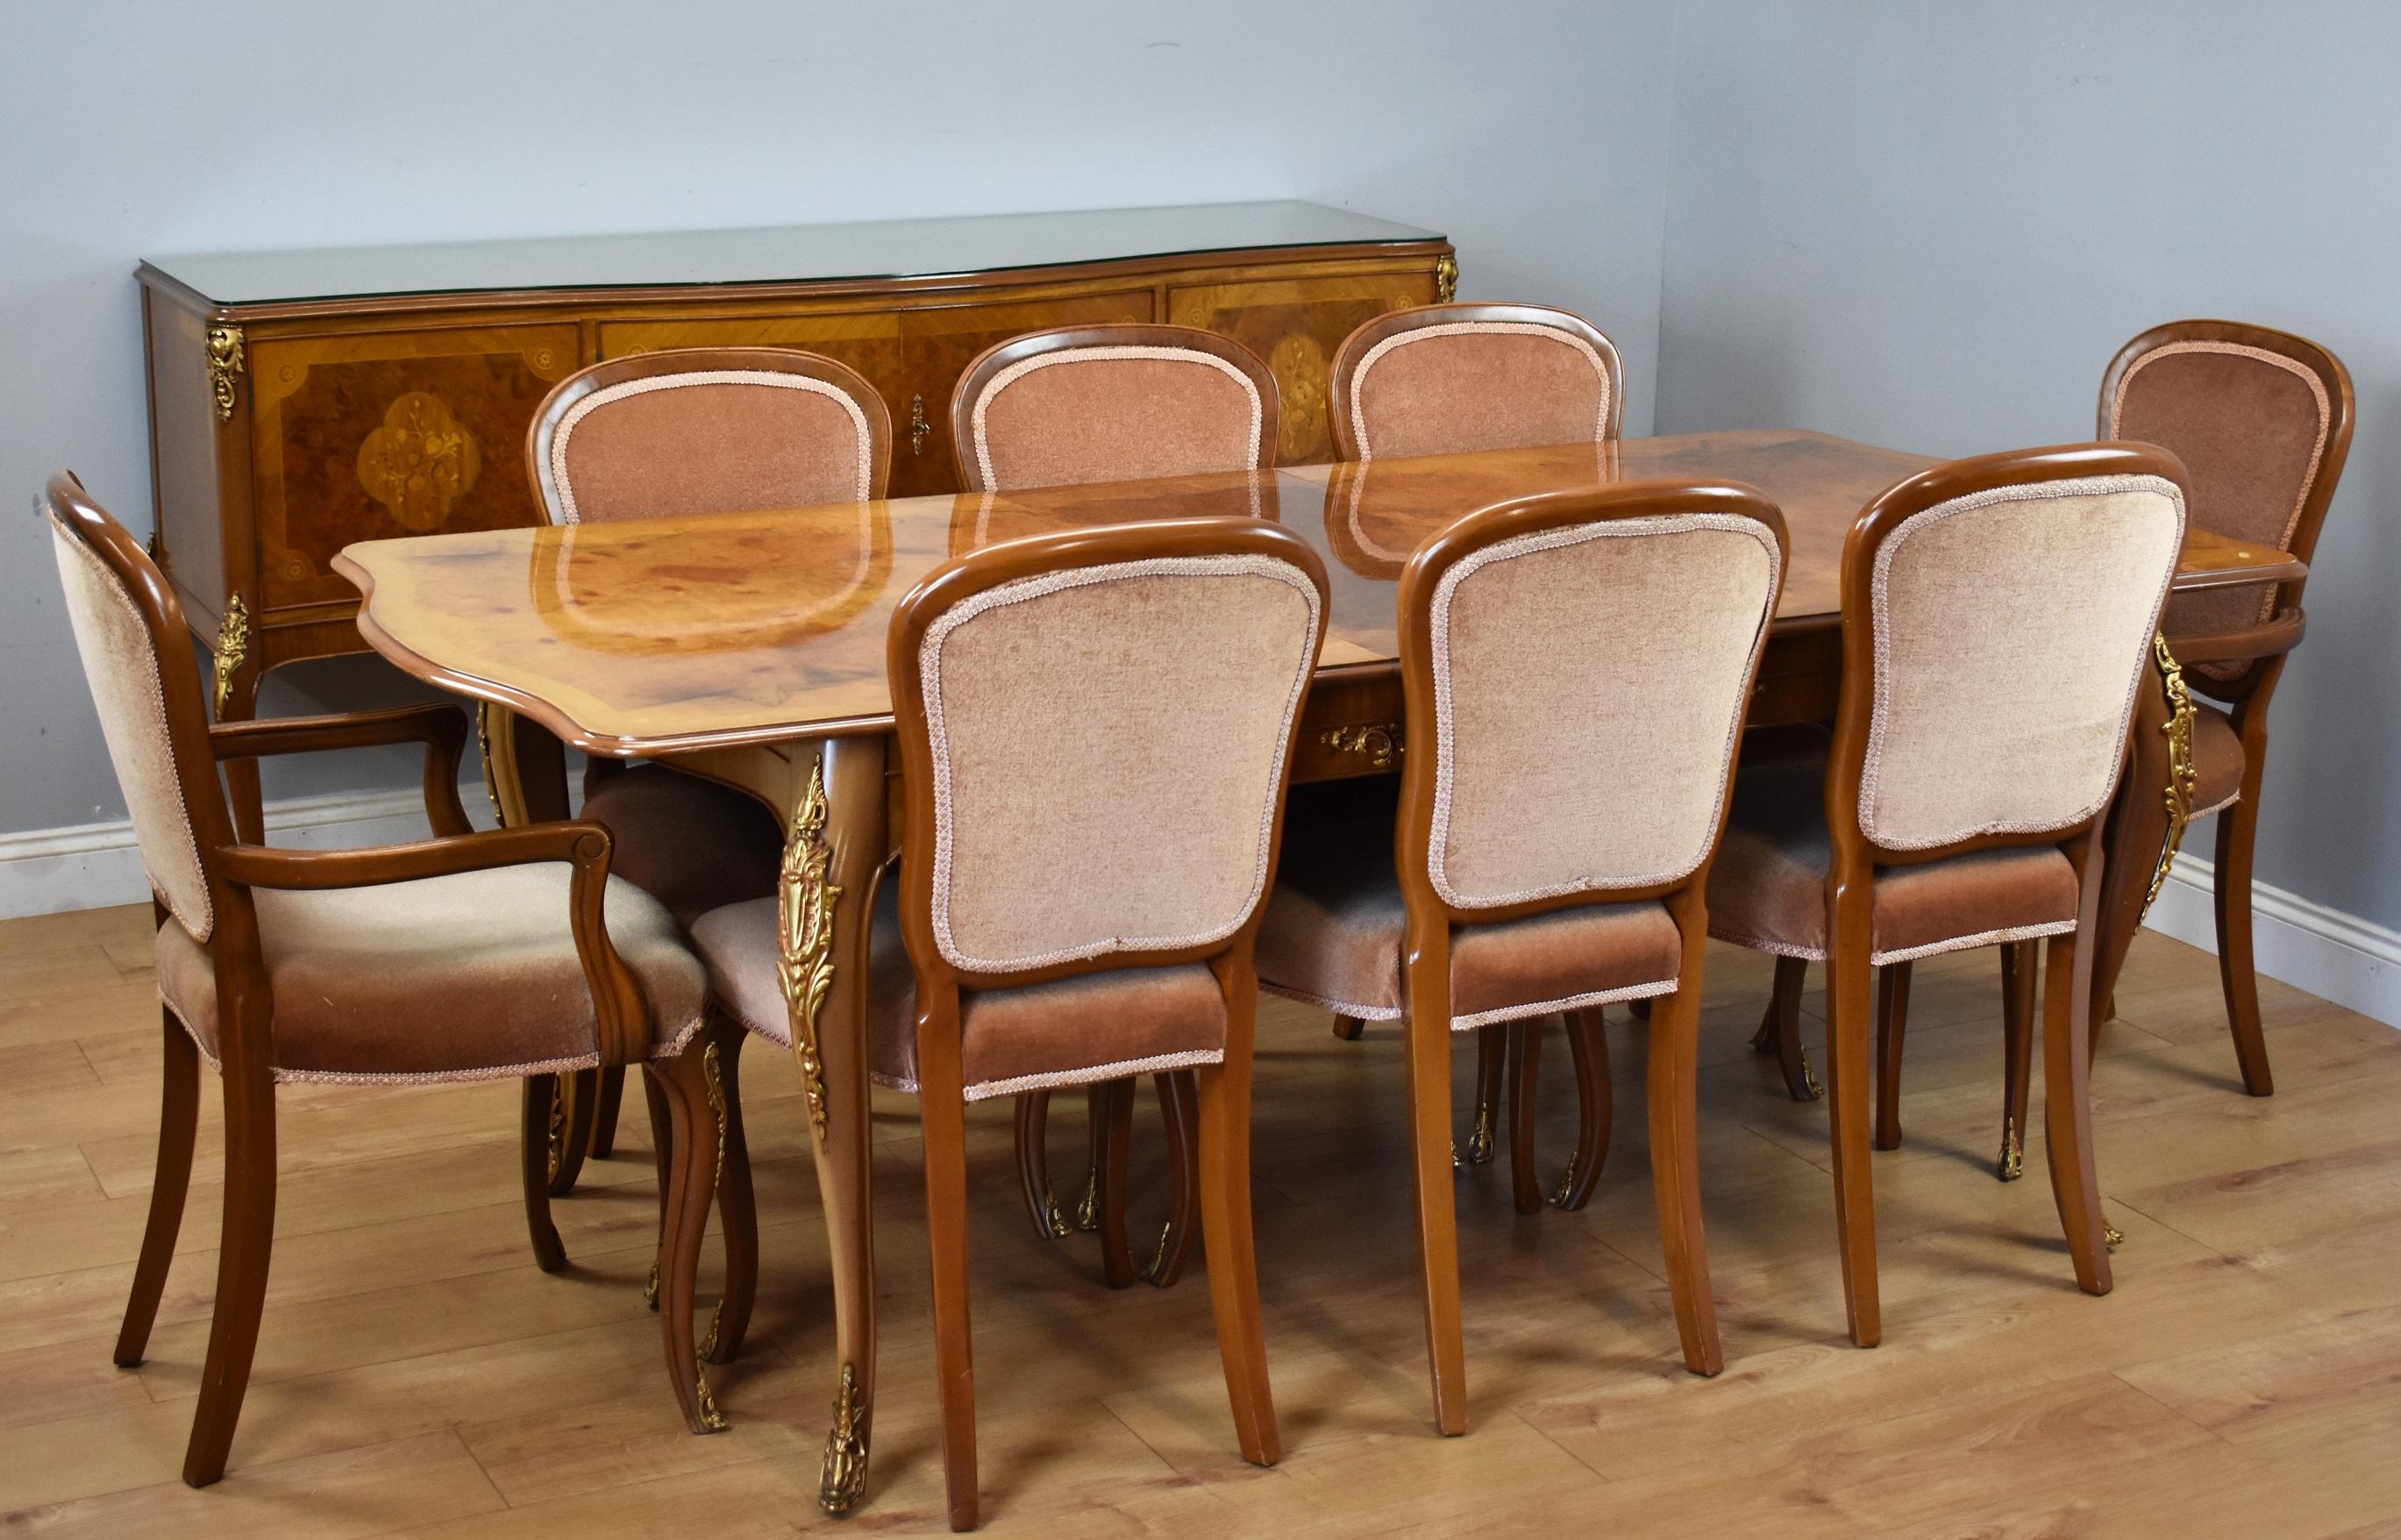 For sale is a good quality burr walnut dining suite by H&L Epstein. The suite comprises a large four door sideboard, 8 seat dining table and 8 dining chairs (two carvers + six singles). The sideboard is serpentine in form and has four cupboard